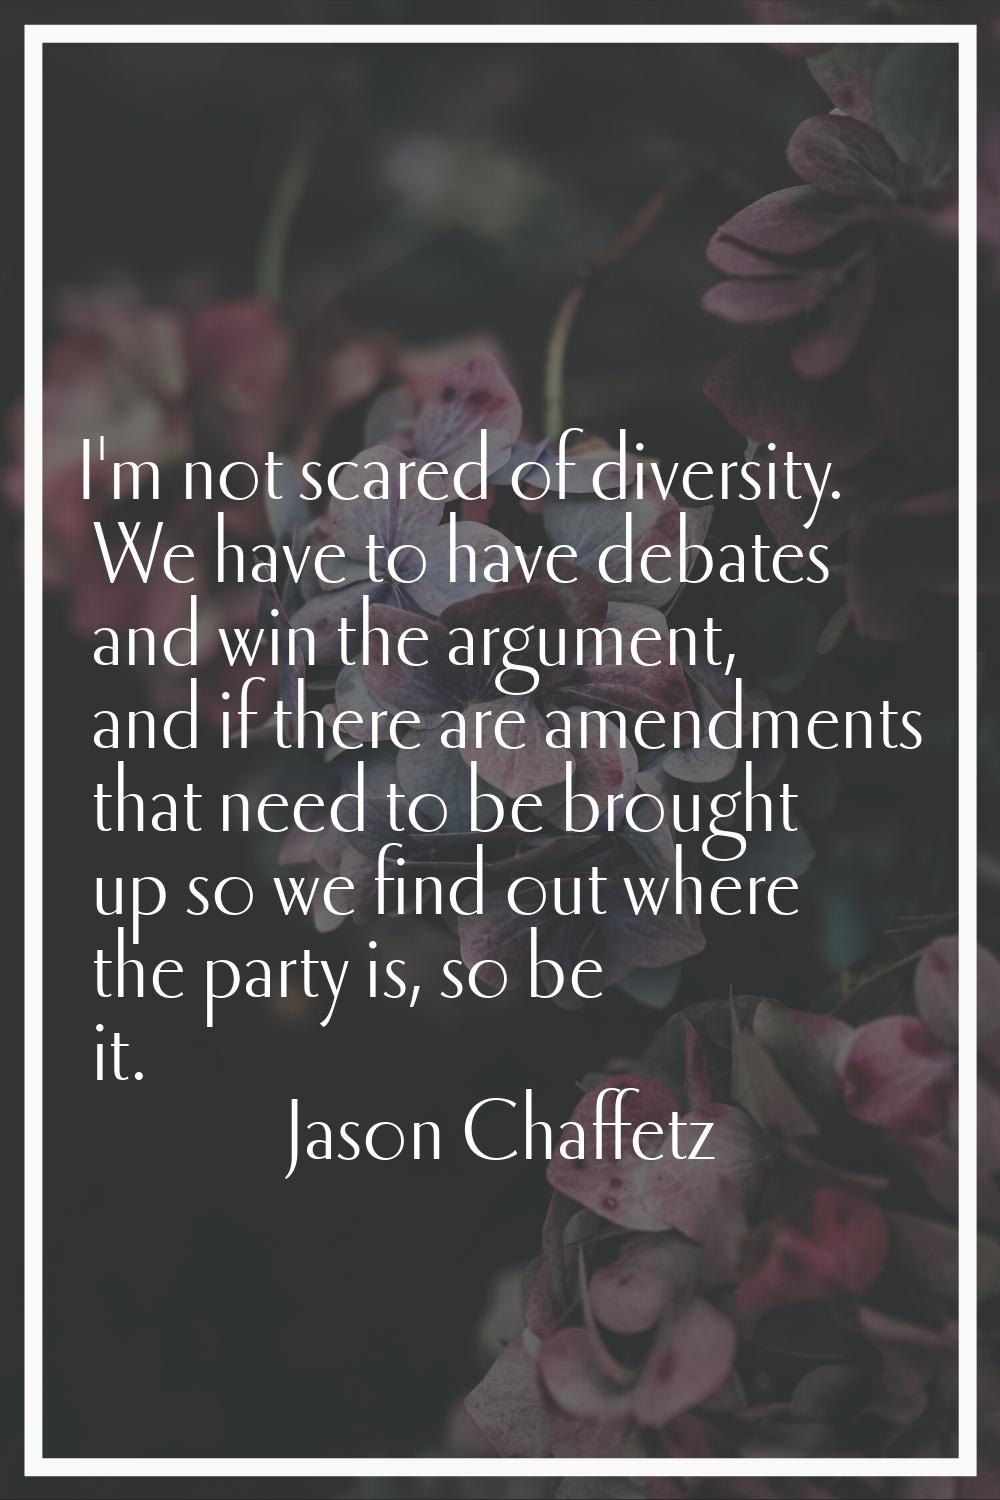 I'm not scared of diversity. We have to have debates and win the argument, and if there are amendme